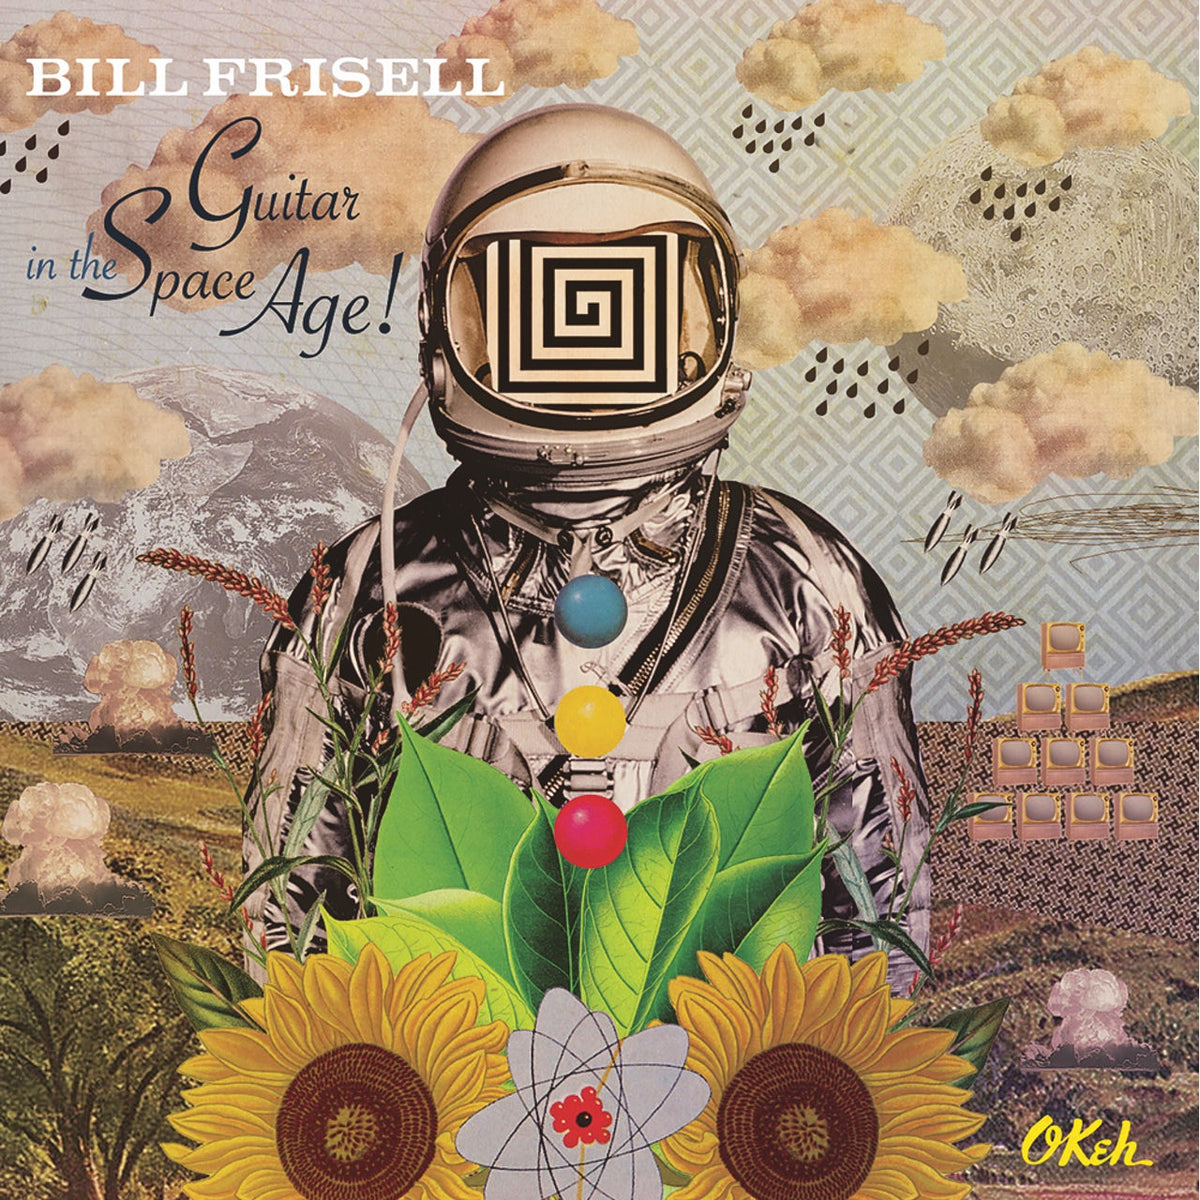 Bill Frisell - Guitar In The Space Age!